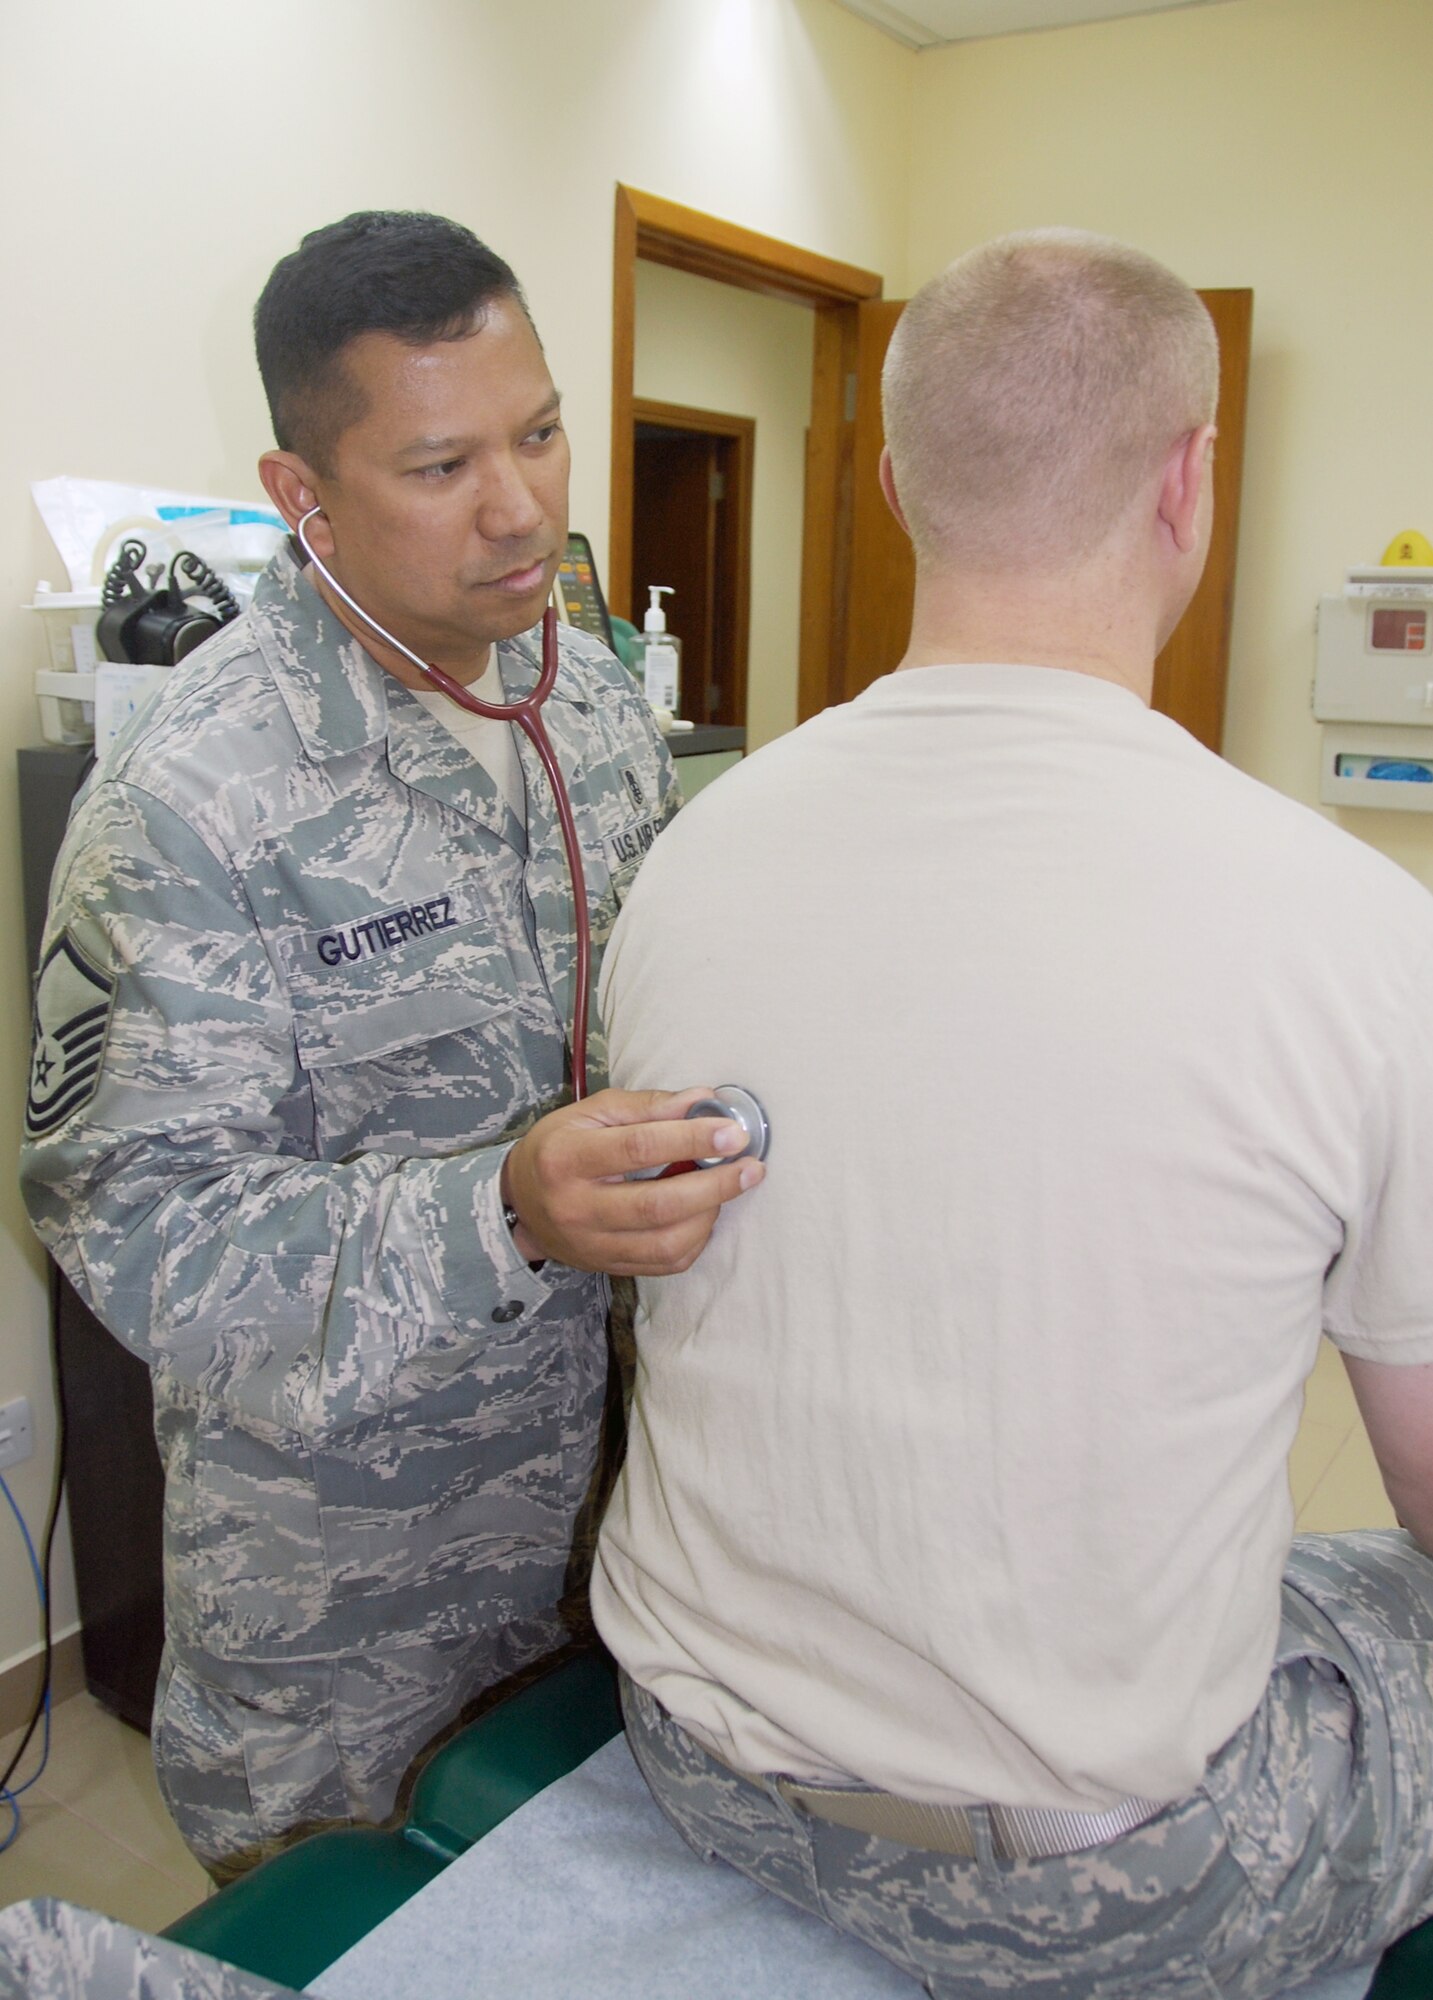 Master Sgt. Roberto Gutierrez, an independent duty medical technician from the 386th Expeditionary Operations Support Squadron, listens to a patient's lungs May 1 at an air base in Southwest Asia. There are fewer than 500 IDMTs in the Air Force and they are often assigned to flying units or organizations in isolated locations to tend to the unit's medical needs. (U.S. Air Force photo/Capt. Joe Campbell)